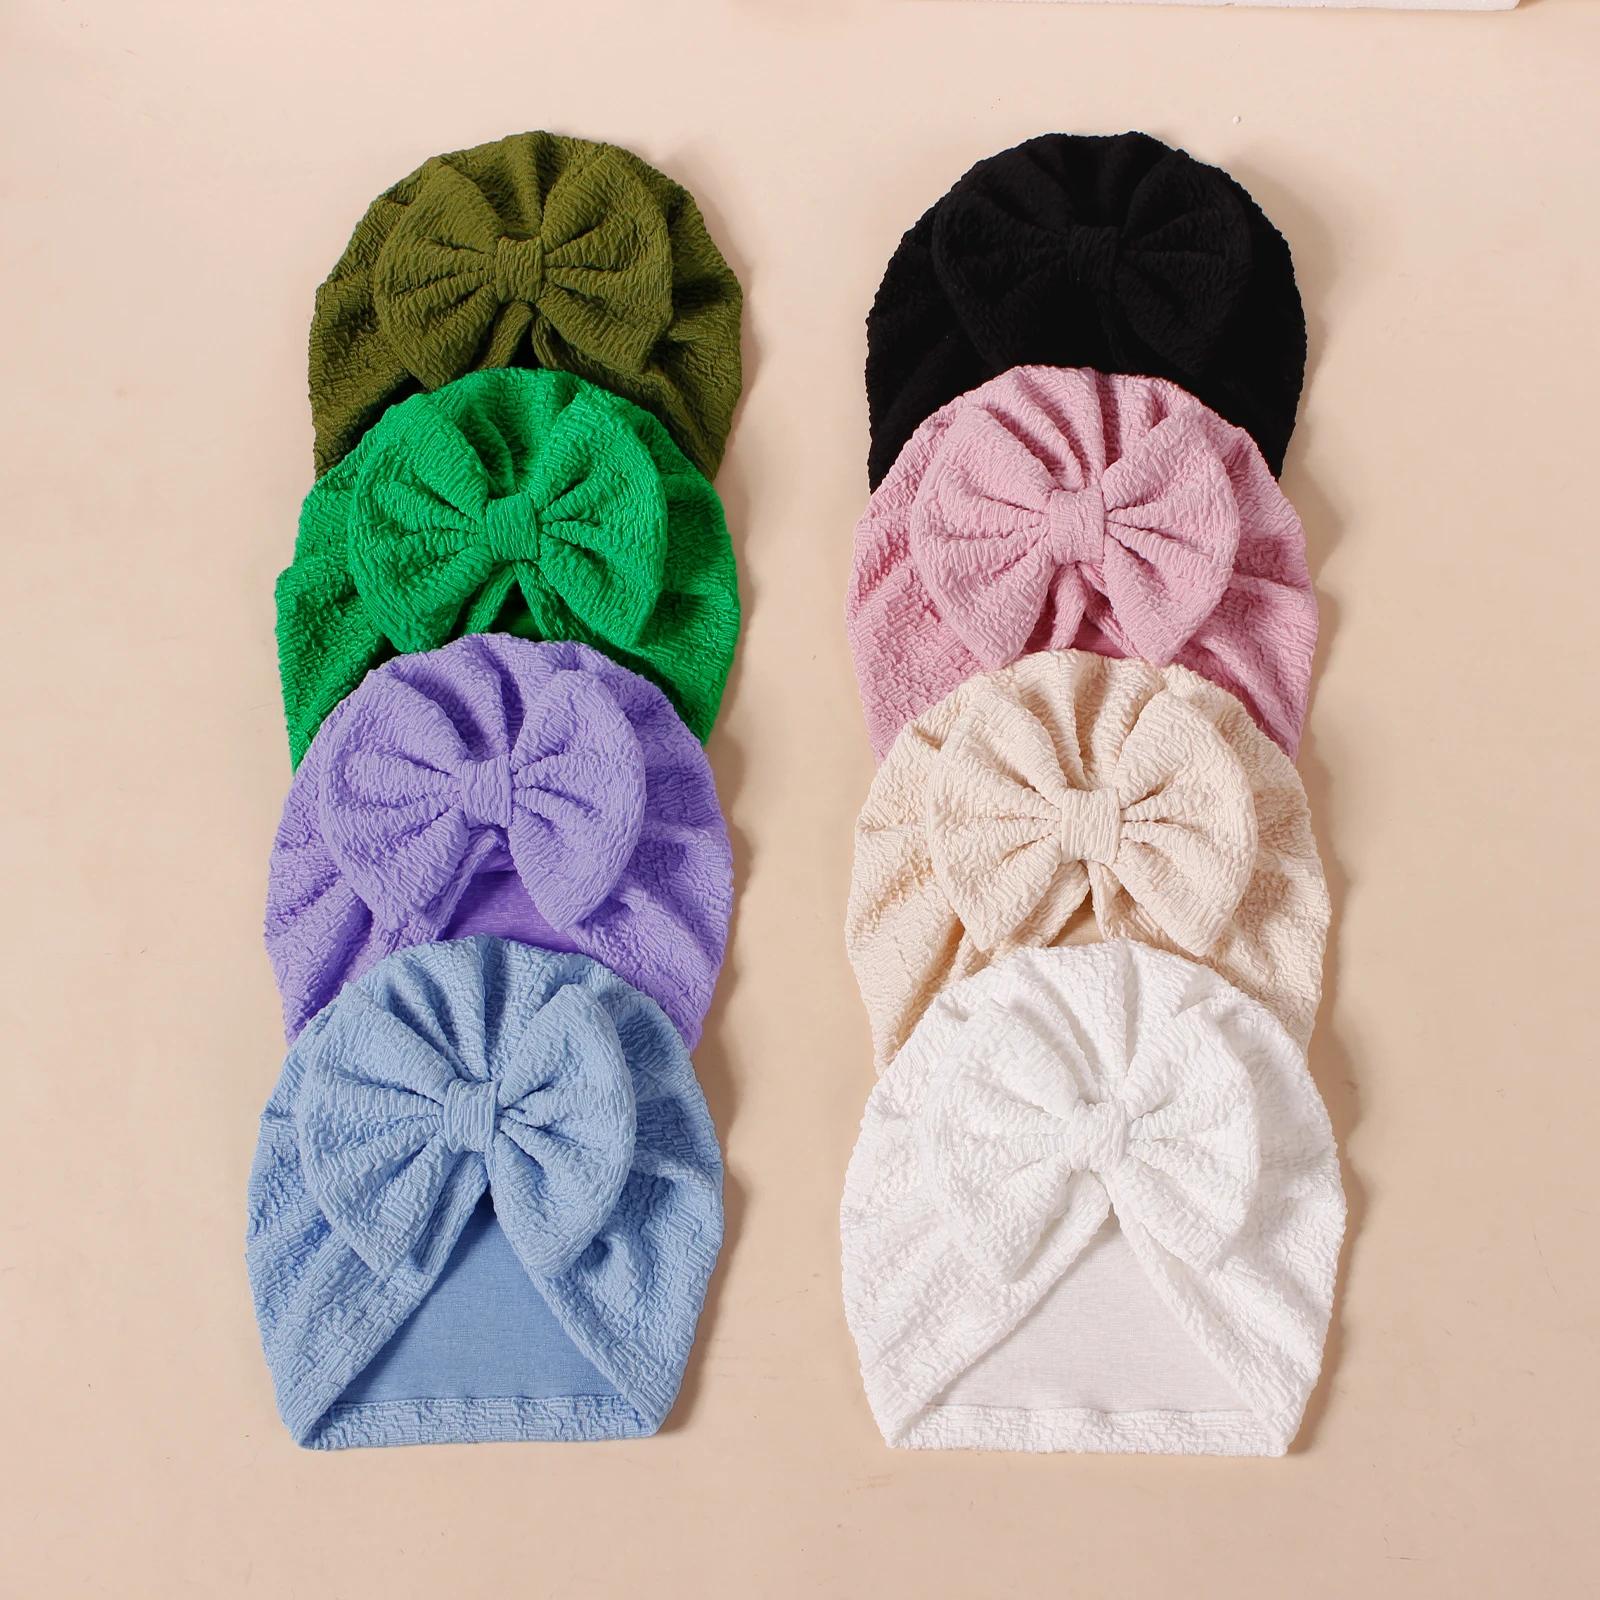 New Soft Cotton Bowknot Turban Babes Solid Color HeadWraps Solid Baby India Hat Kid Girl Infant Beanie Cap Toddler Baby Headwear 20pc lot 2022 newborn cashmere bows turban hat baby girl wrinkle head wraps infant bonnet beanie kid india turban hospital caps